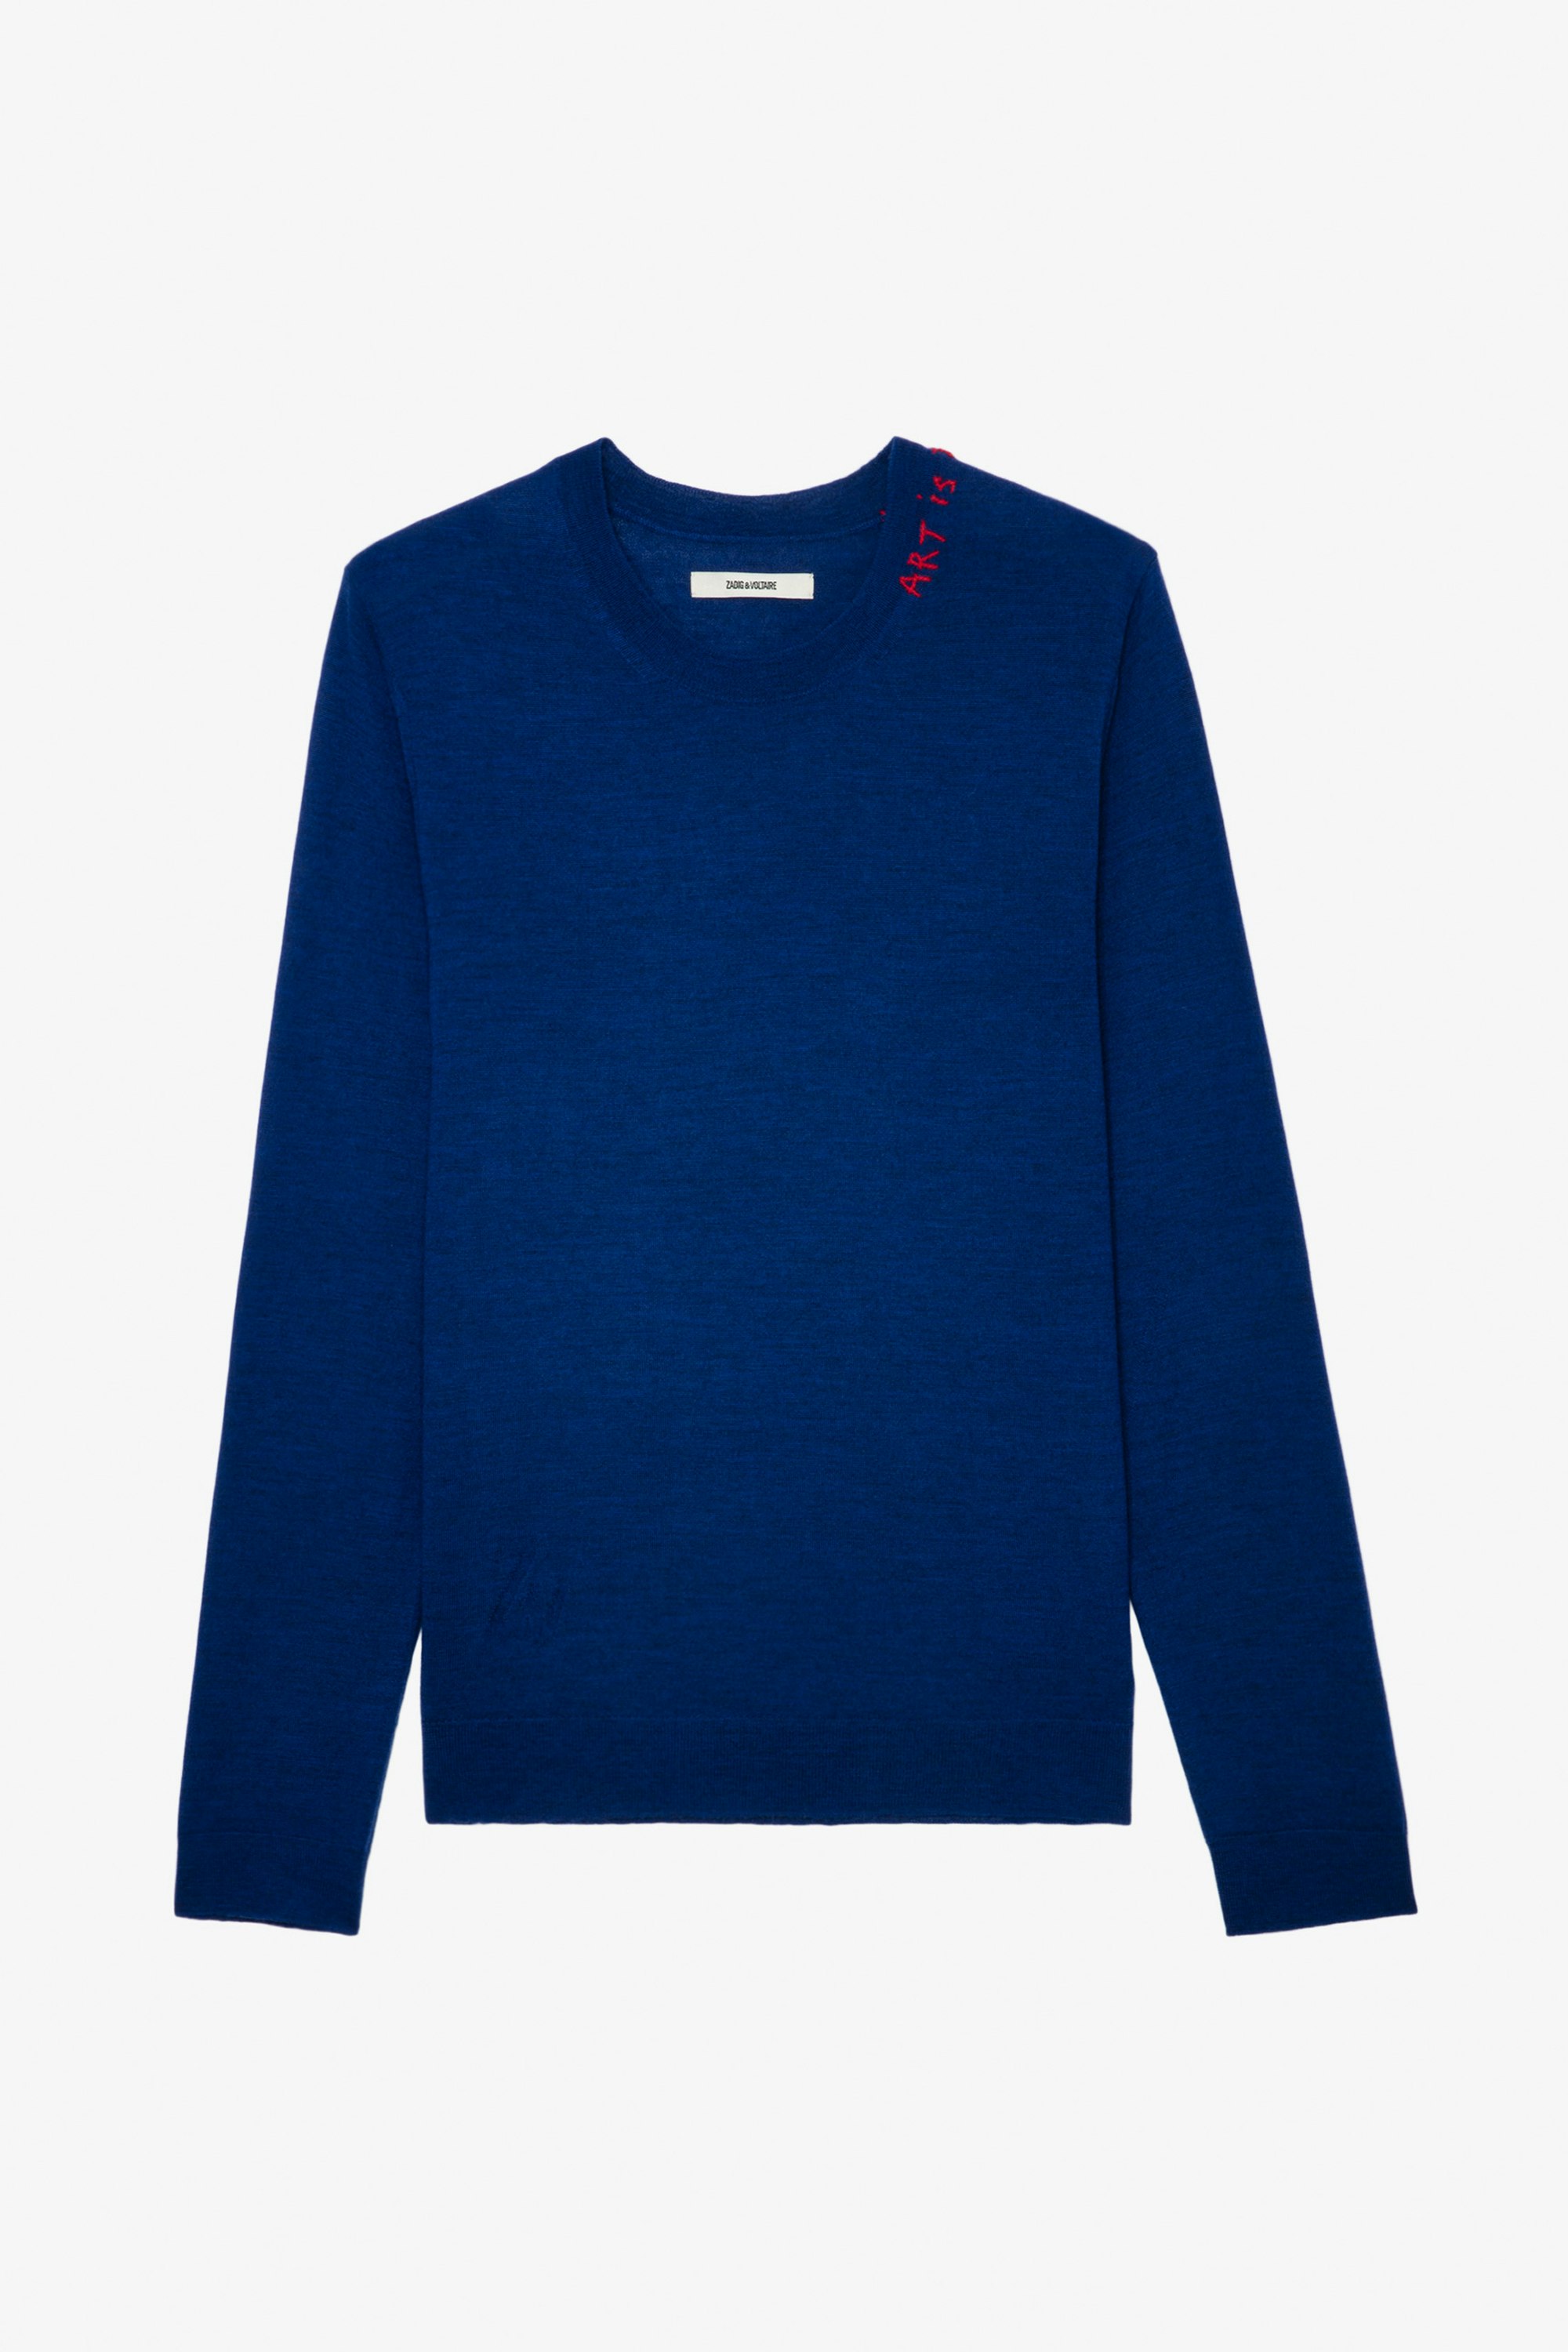 Kennedy Jumper - Men’s blue merino wool jumper with “Art Is Truth” embroidery on the neckline.